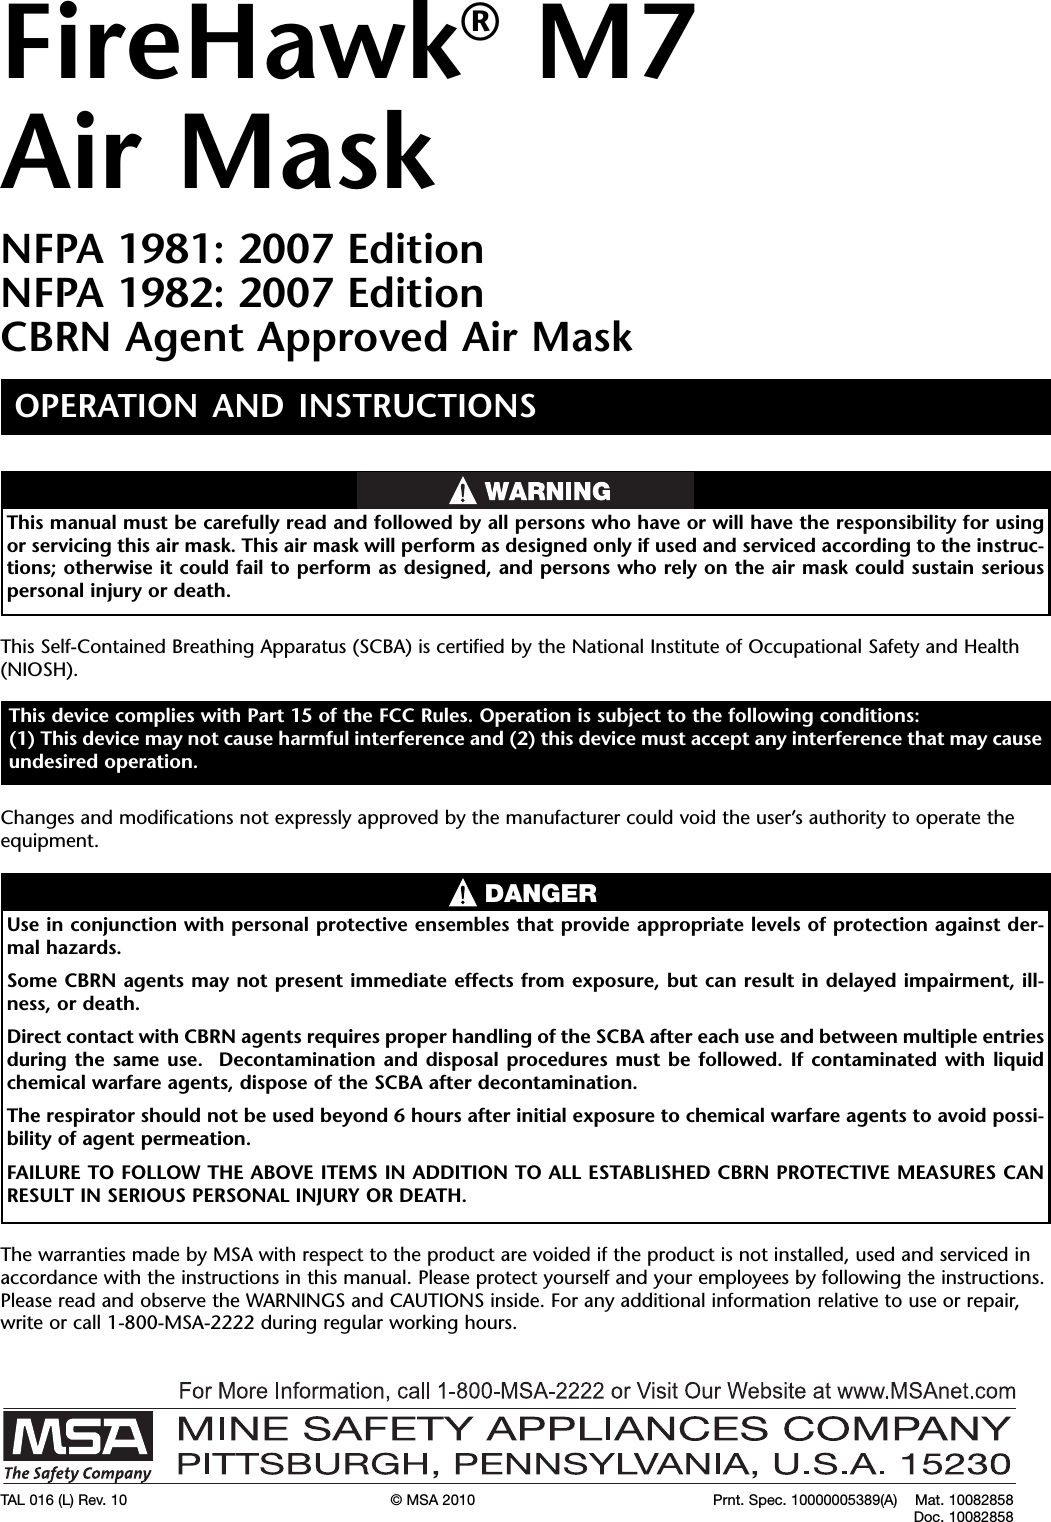 FireHawk®M7Air MaskNFPA 1981: 2007 EditionNFPA 1982: 2007 EditionCBRN Agent Approved Air MaskOPERATION AND INSTRUCTIONSThis device complies with Part 15 of the FCC Rules. Operation is subject to the following conditions:(1) This device may not cause harmful interference and (2) this device must accept any interference that may causeundesired operation.TAL 016 (L) Rev. 10 © MSA 2010 Prnt. Spec. 10000005389(A) Mat. 10082858Doc. 10082858This manual must be carefully read and followed by all persons who have or will have the responsibility for usingor servicing this air mask. This air mask will perform as designed only if used and serviced according to the instruc-tions; otherwise it could fail to perform as designed, and persons who rely on the air mask could sustain seriouspersonal injury or death.This Self-Contained Breathing Apparatus (SCBA) is certified by the National Institute of Occupational Safety and Health(NIOSH).Changes and modifications not expressly approved by the manufacturer could void the user’s authority to operate theequipment.Use in conjunction with personal protective ensembles that provide appropriate levels of protection against der-mal hazards.Some CBRN agents may not present immediate effects from exposure, but can result in delayed impairment, ill-ness, or death.Direct contact with CBRN agents requires proper handling of the SCBA after each use and between multiple entriesduring the same use. Decontamination and disposal procedures must be followed. If contaminated with liquidchemical warfare agents, dispose of the SCBA after decontamination.The respirator should not be used beyond 6 hours after initial exposure to chemical warfare agents to avoid possi-bility of agent permeation.FAILURE TO FOLLOW THE ABOVE ITEMS IN ADDITION TO ALL ESTABLISHED CBRN PROTECTIVE MEASURES CANRESULT IN SERIOUS PERSONAL INJURY OR DEATH.DANGERThe warranties made by MSA with respect to the product are voided if the product is not installed, used and serviced inaccordance with the instructions in this manual. Please protect yourself and your employees by following the instructions.Please read and observe the WARNINGS and CAUTIONS inside. For any additional information relative to use or repair,write or call 1-800-MSA-2222 during regular working hours.